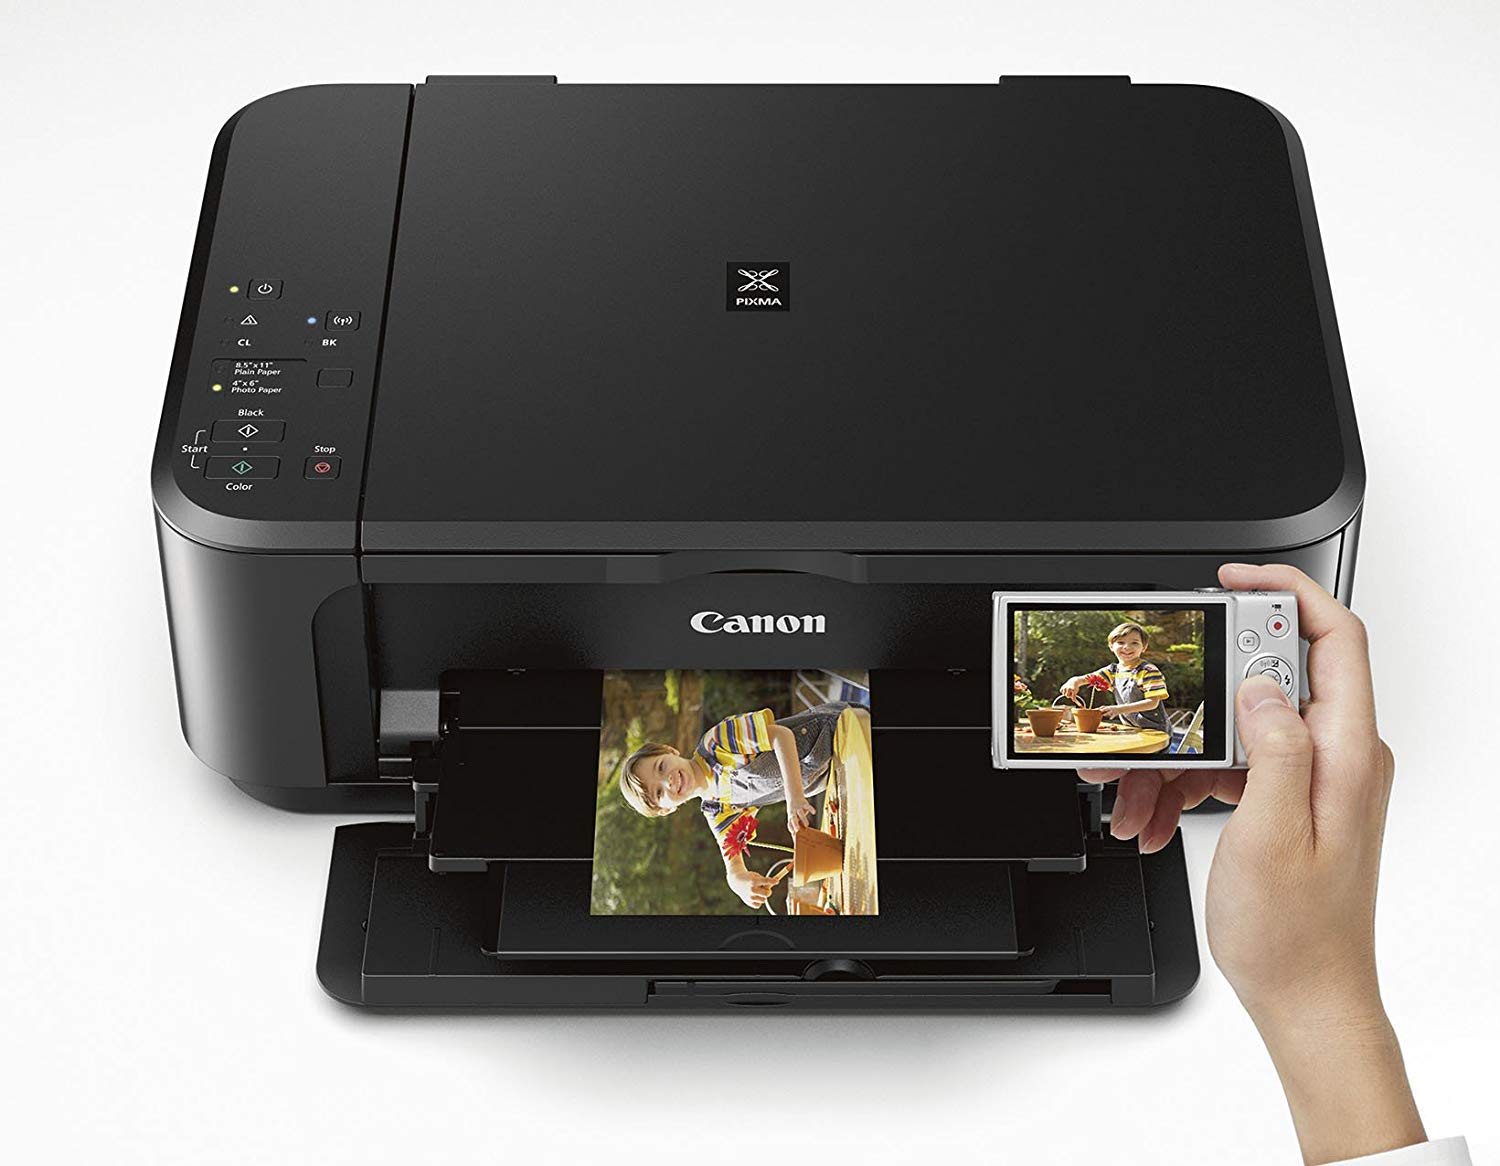 Canon PIXMA MG3620 Wireless All-in-One Color Inkjet Photo Printer, Black - image 3 of 7